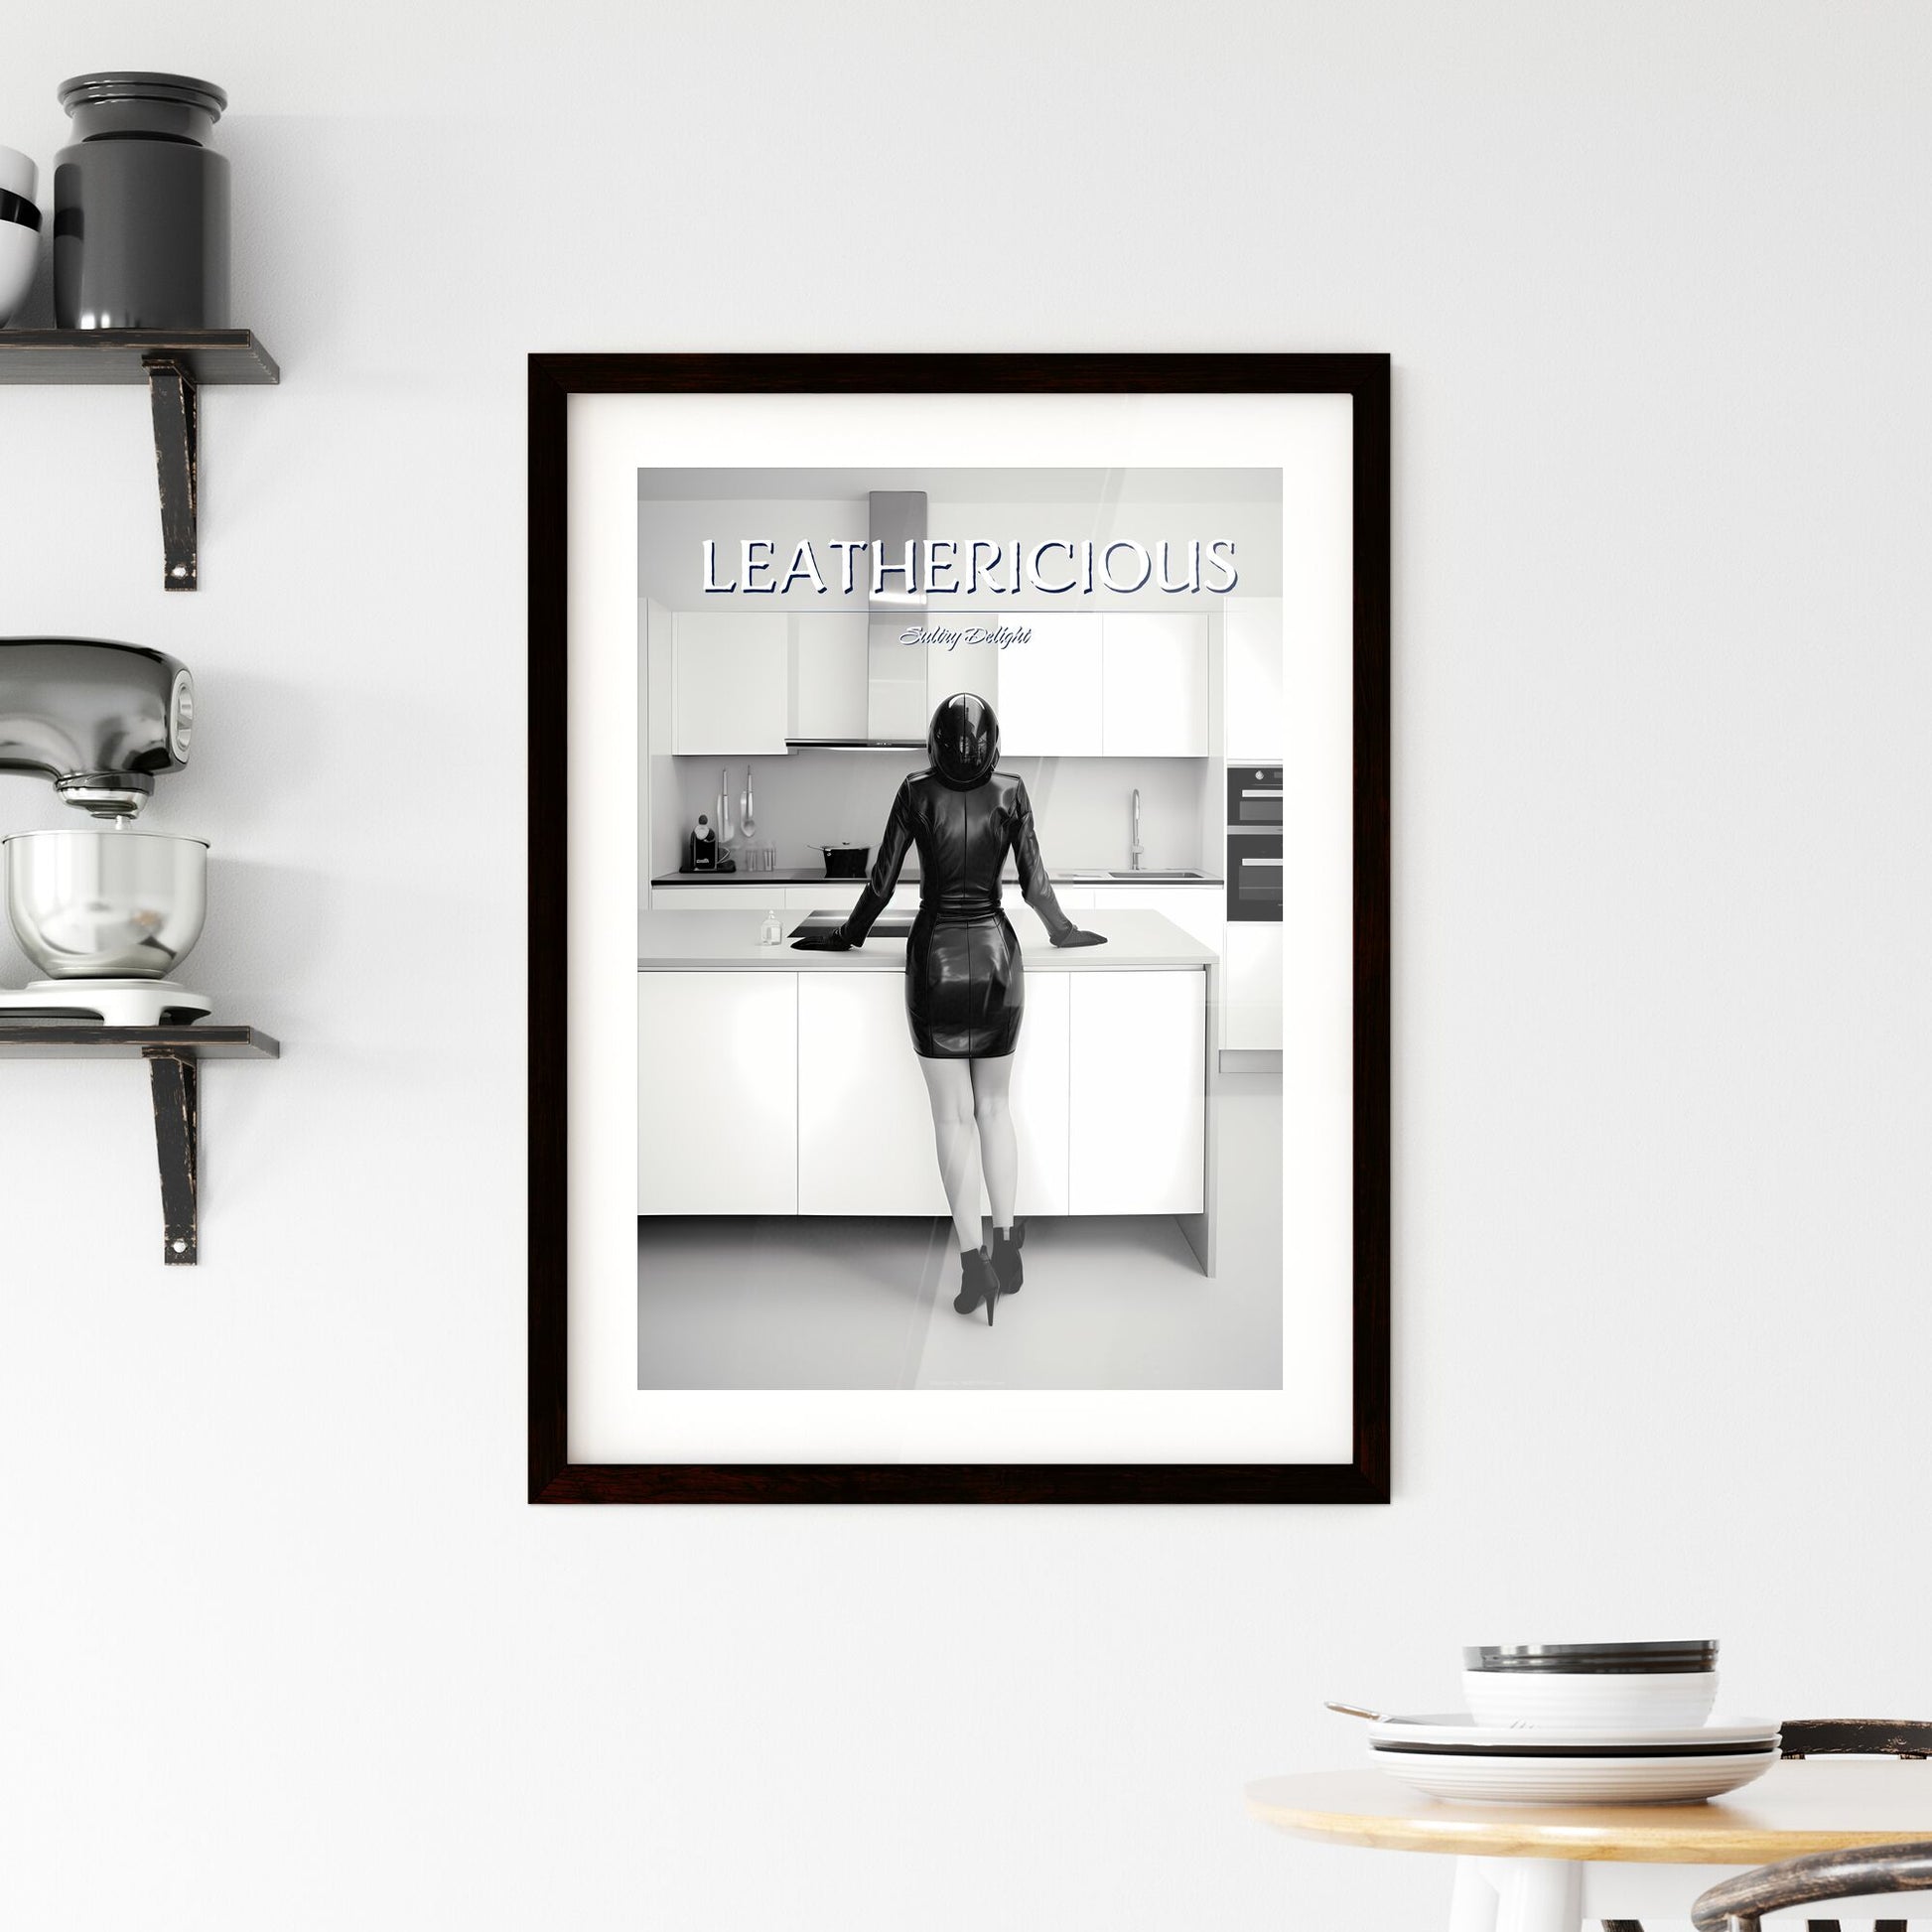 A Poster of woman wearing skintight black leather - A Woman In A Black Latex Outfit In A Kitchen Default Title